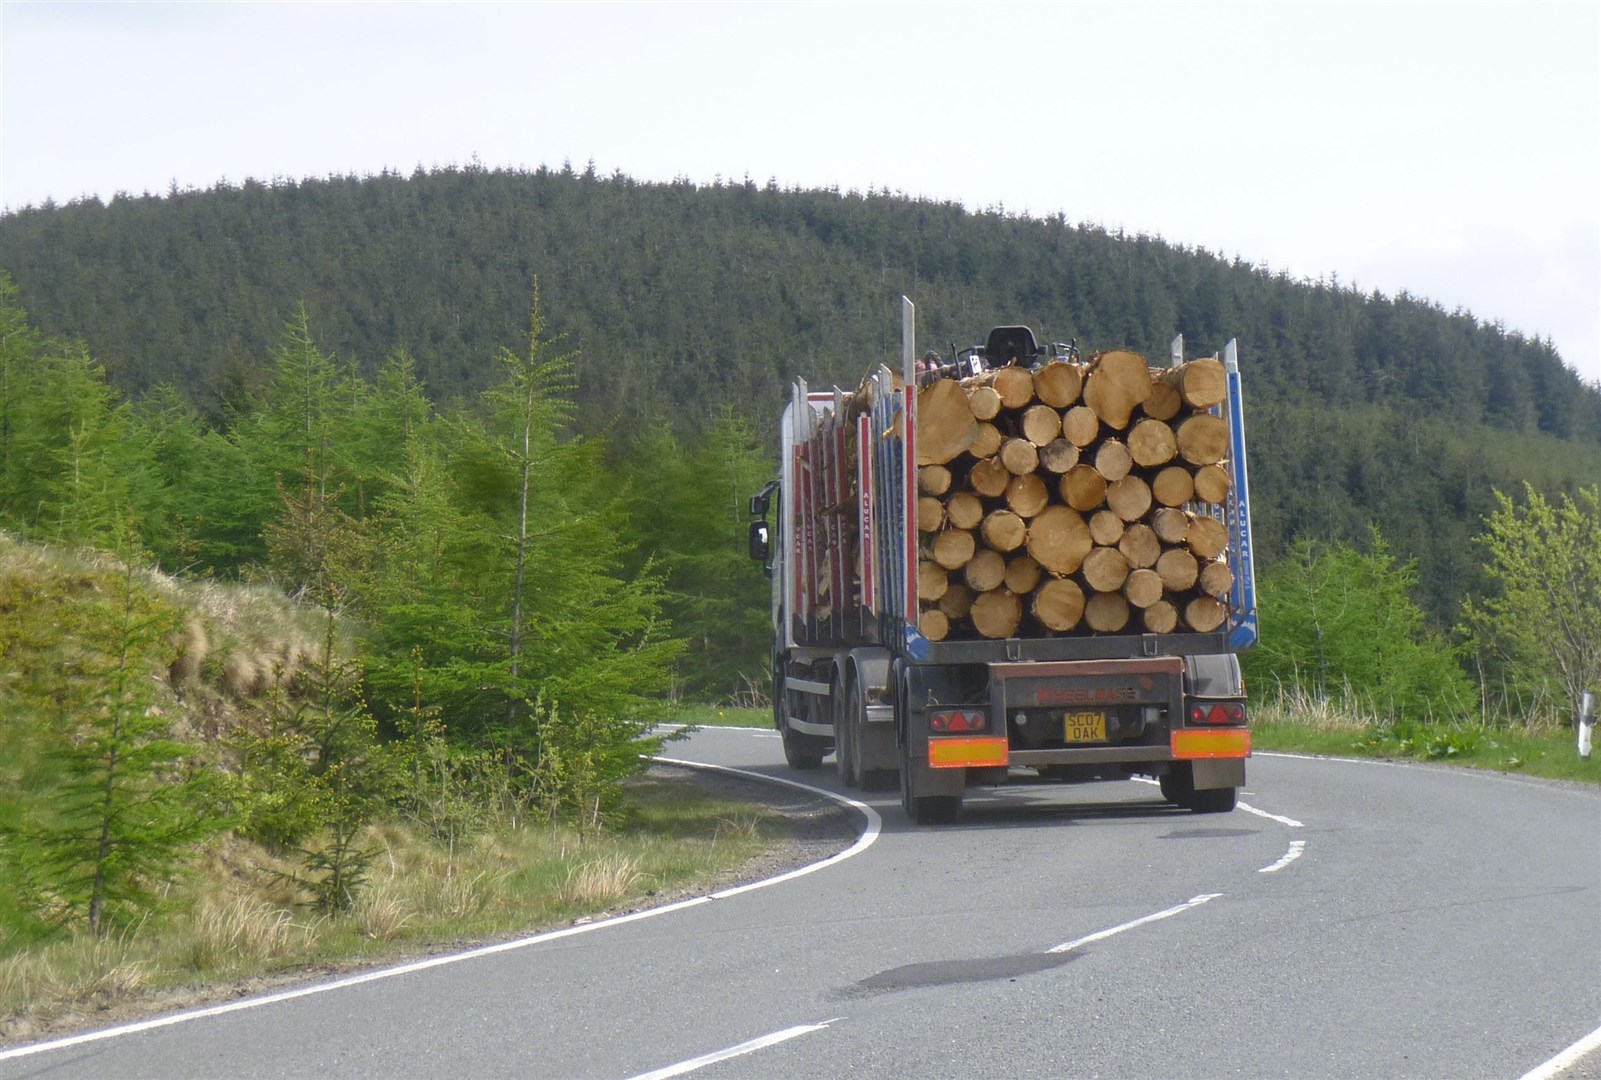 The cash will improve road links used by the forestry industry.